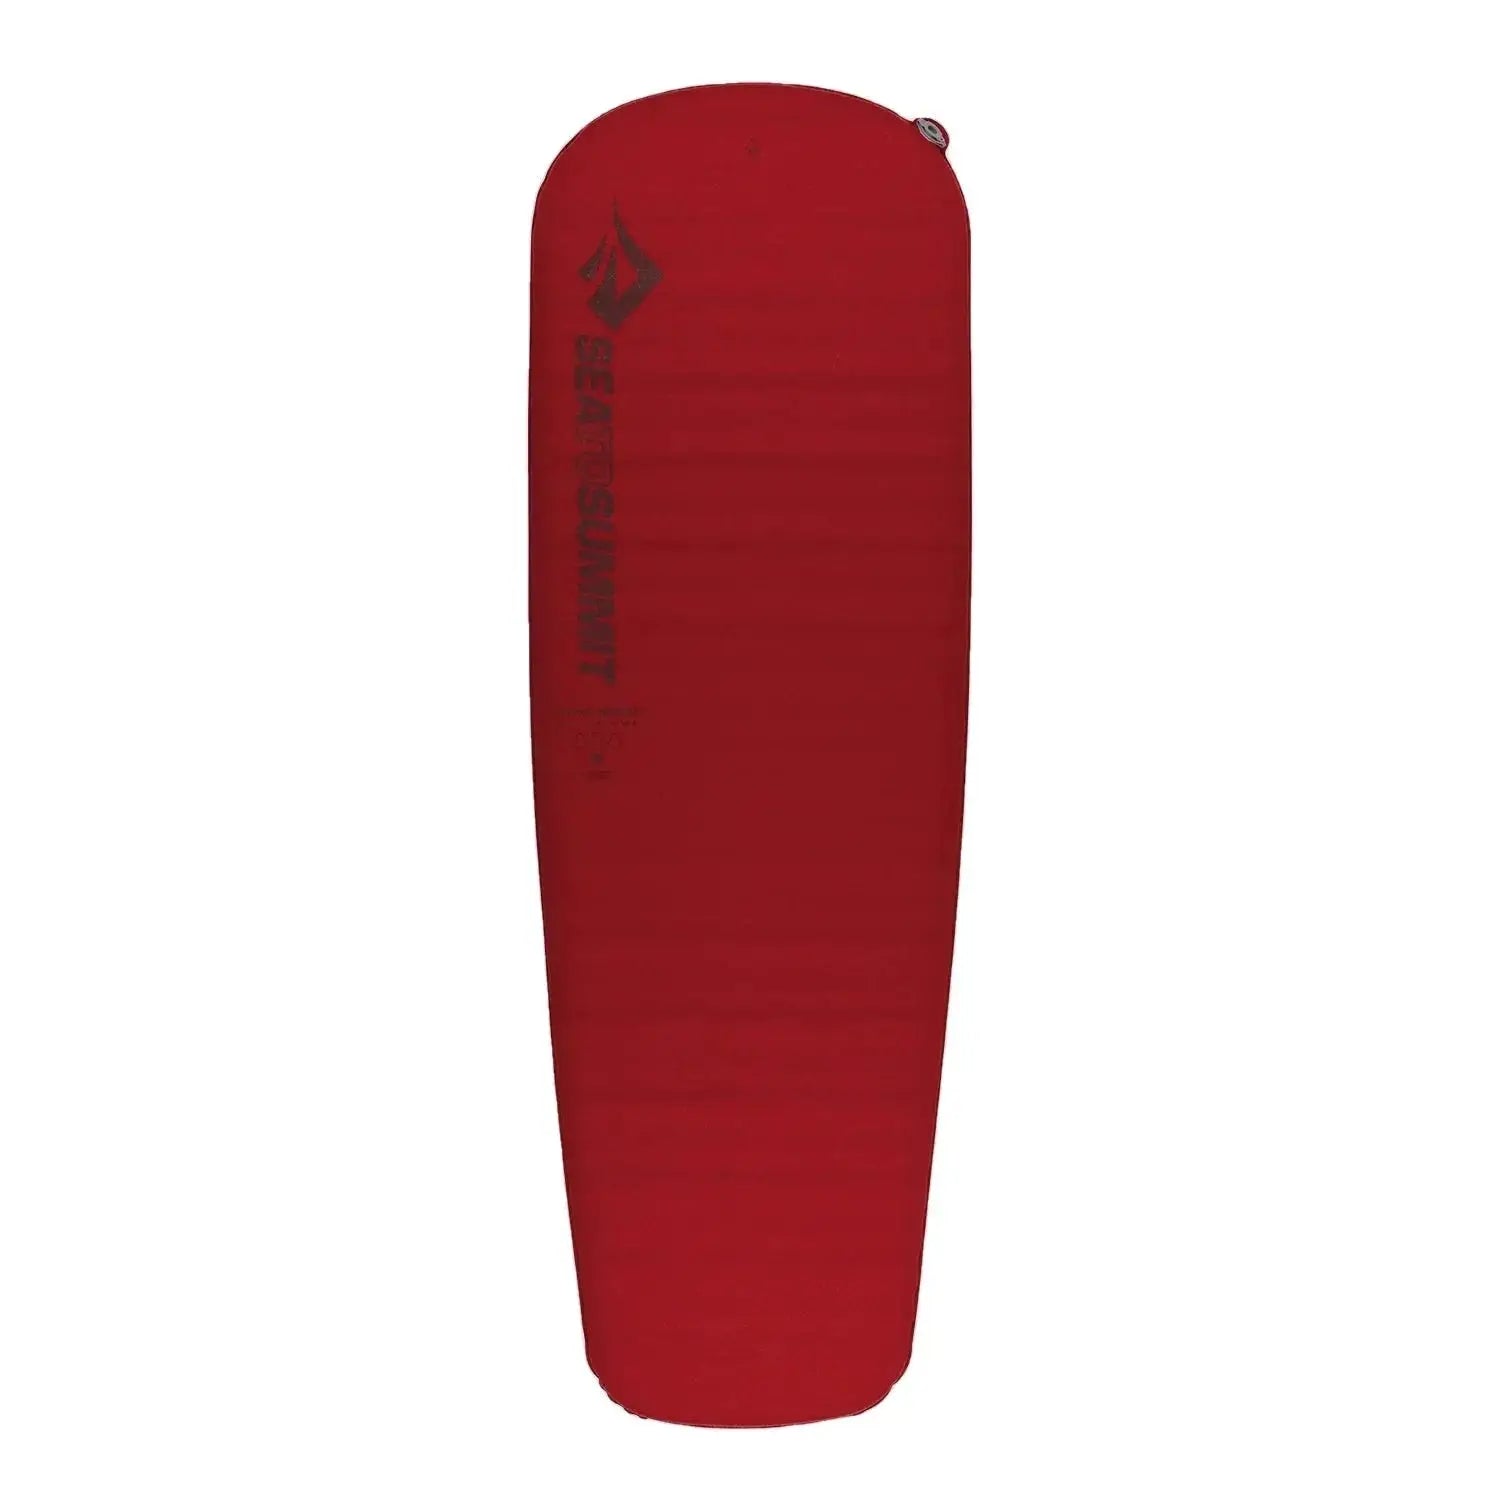 Sea to Summit Comfort Plus Self-Inflating Sleeping Mat, Crimson Red, front view of large size 